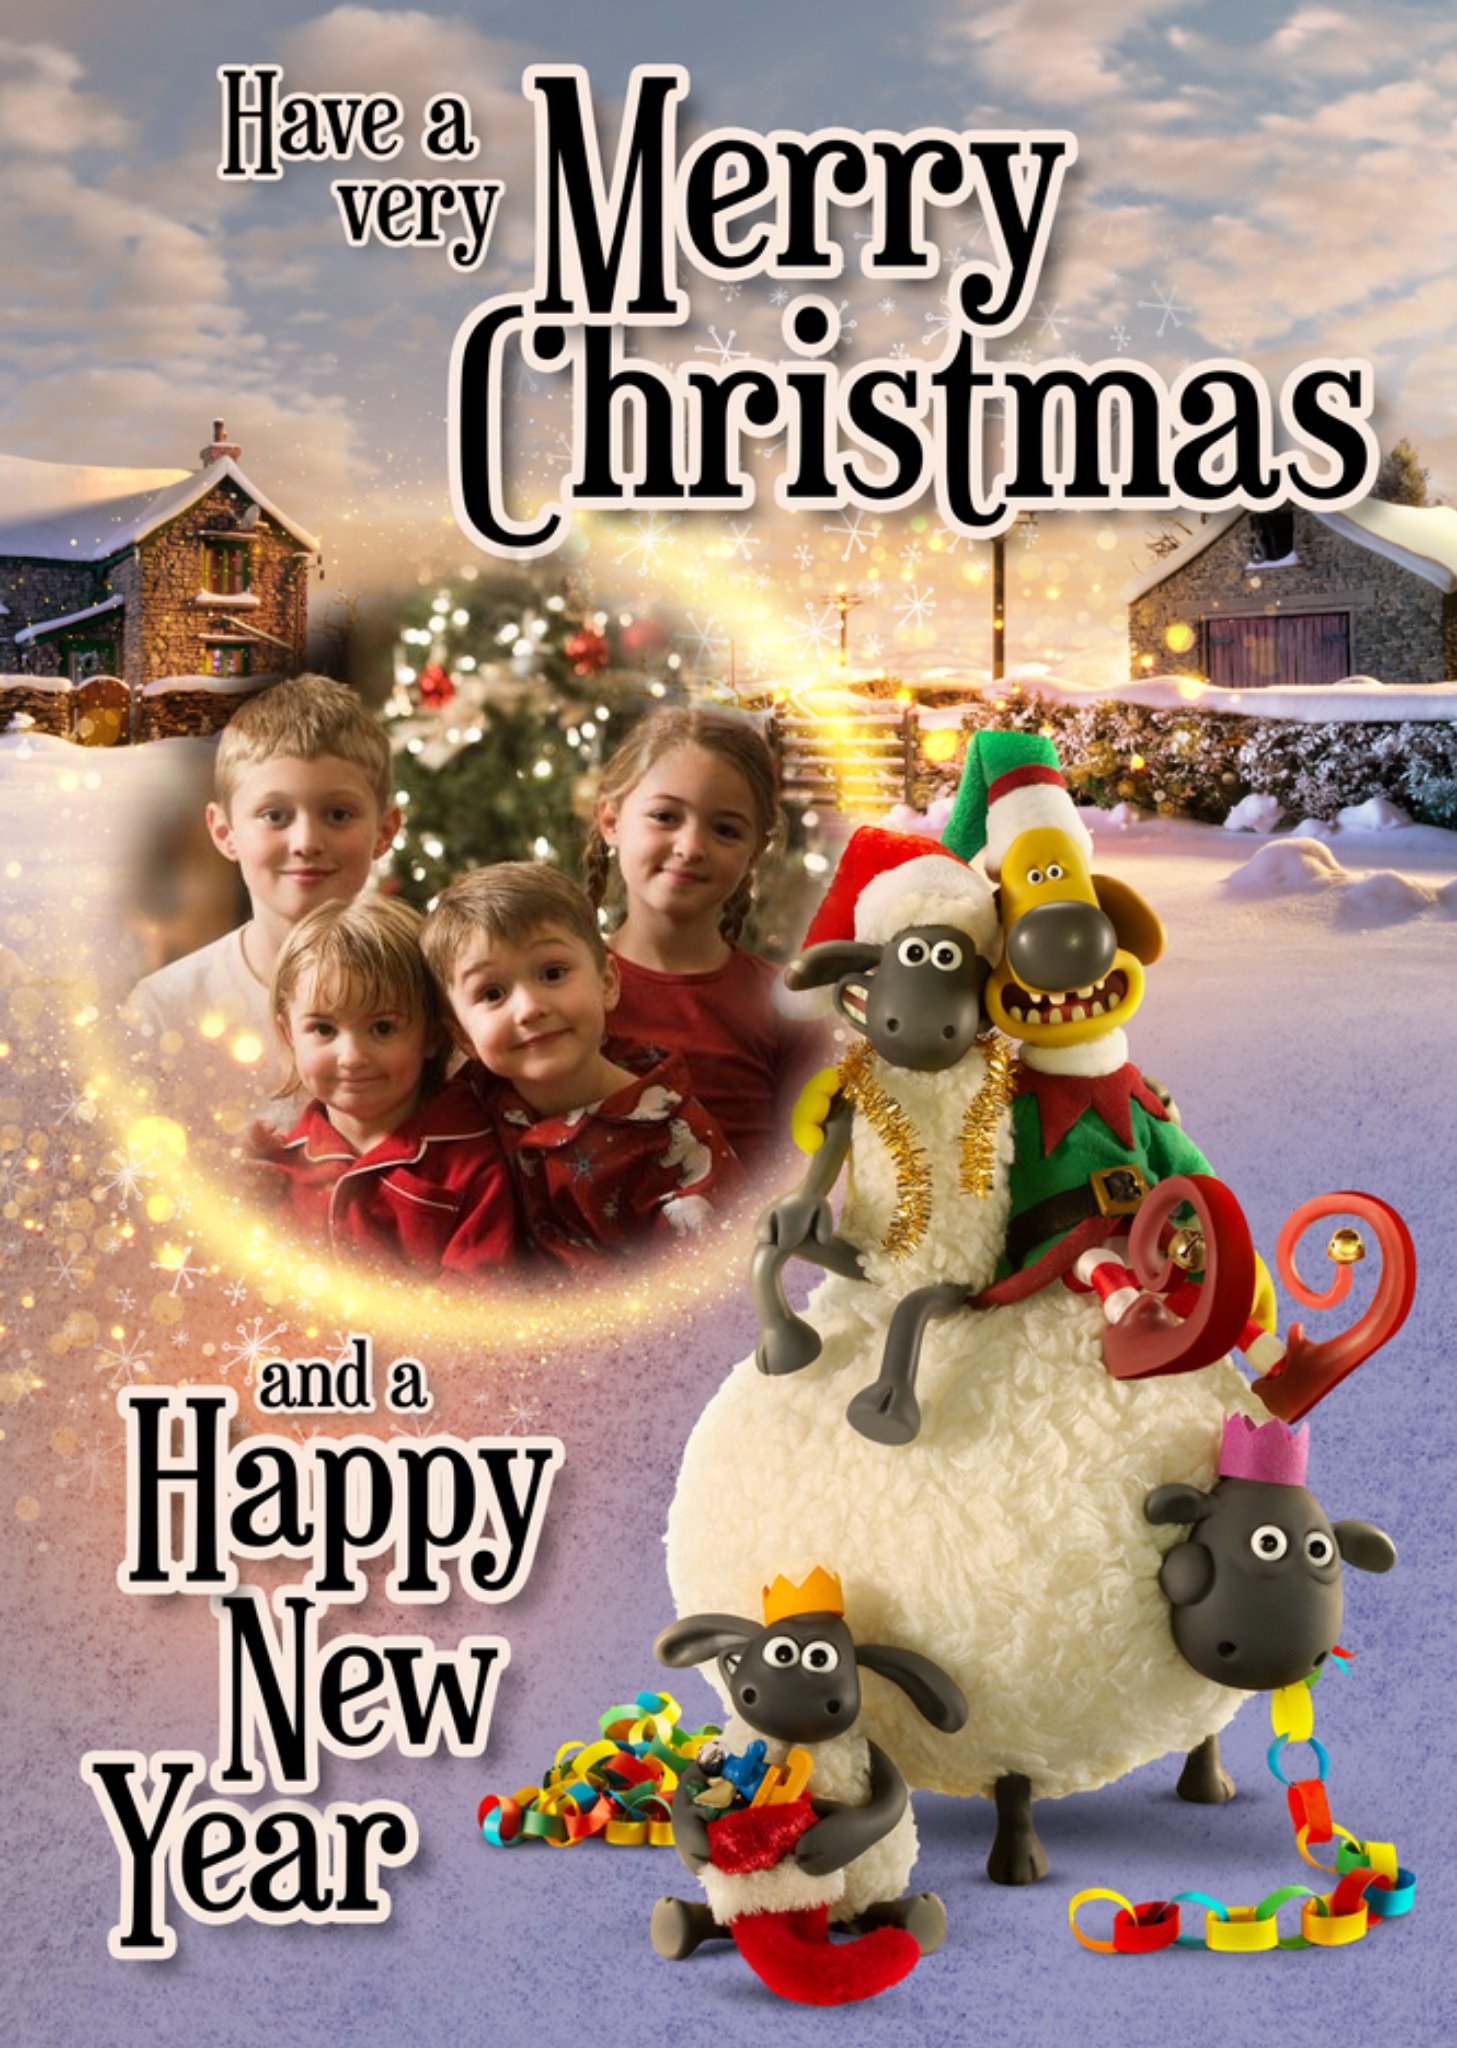 Shaun The Sheep Characters With Christmas Decorations Photo Upload Card Ecard